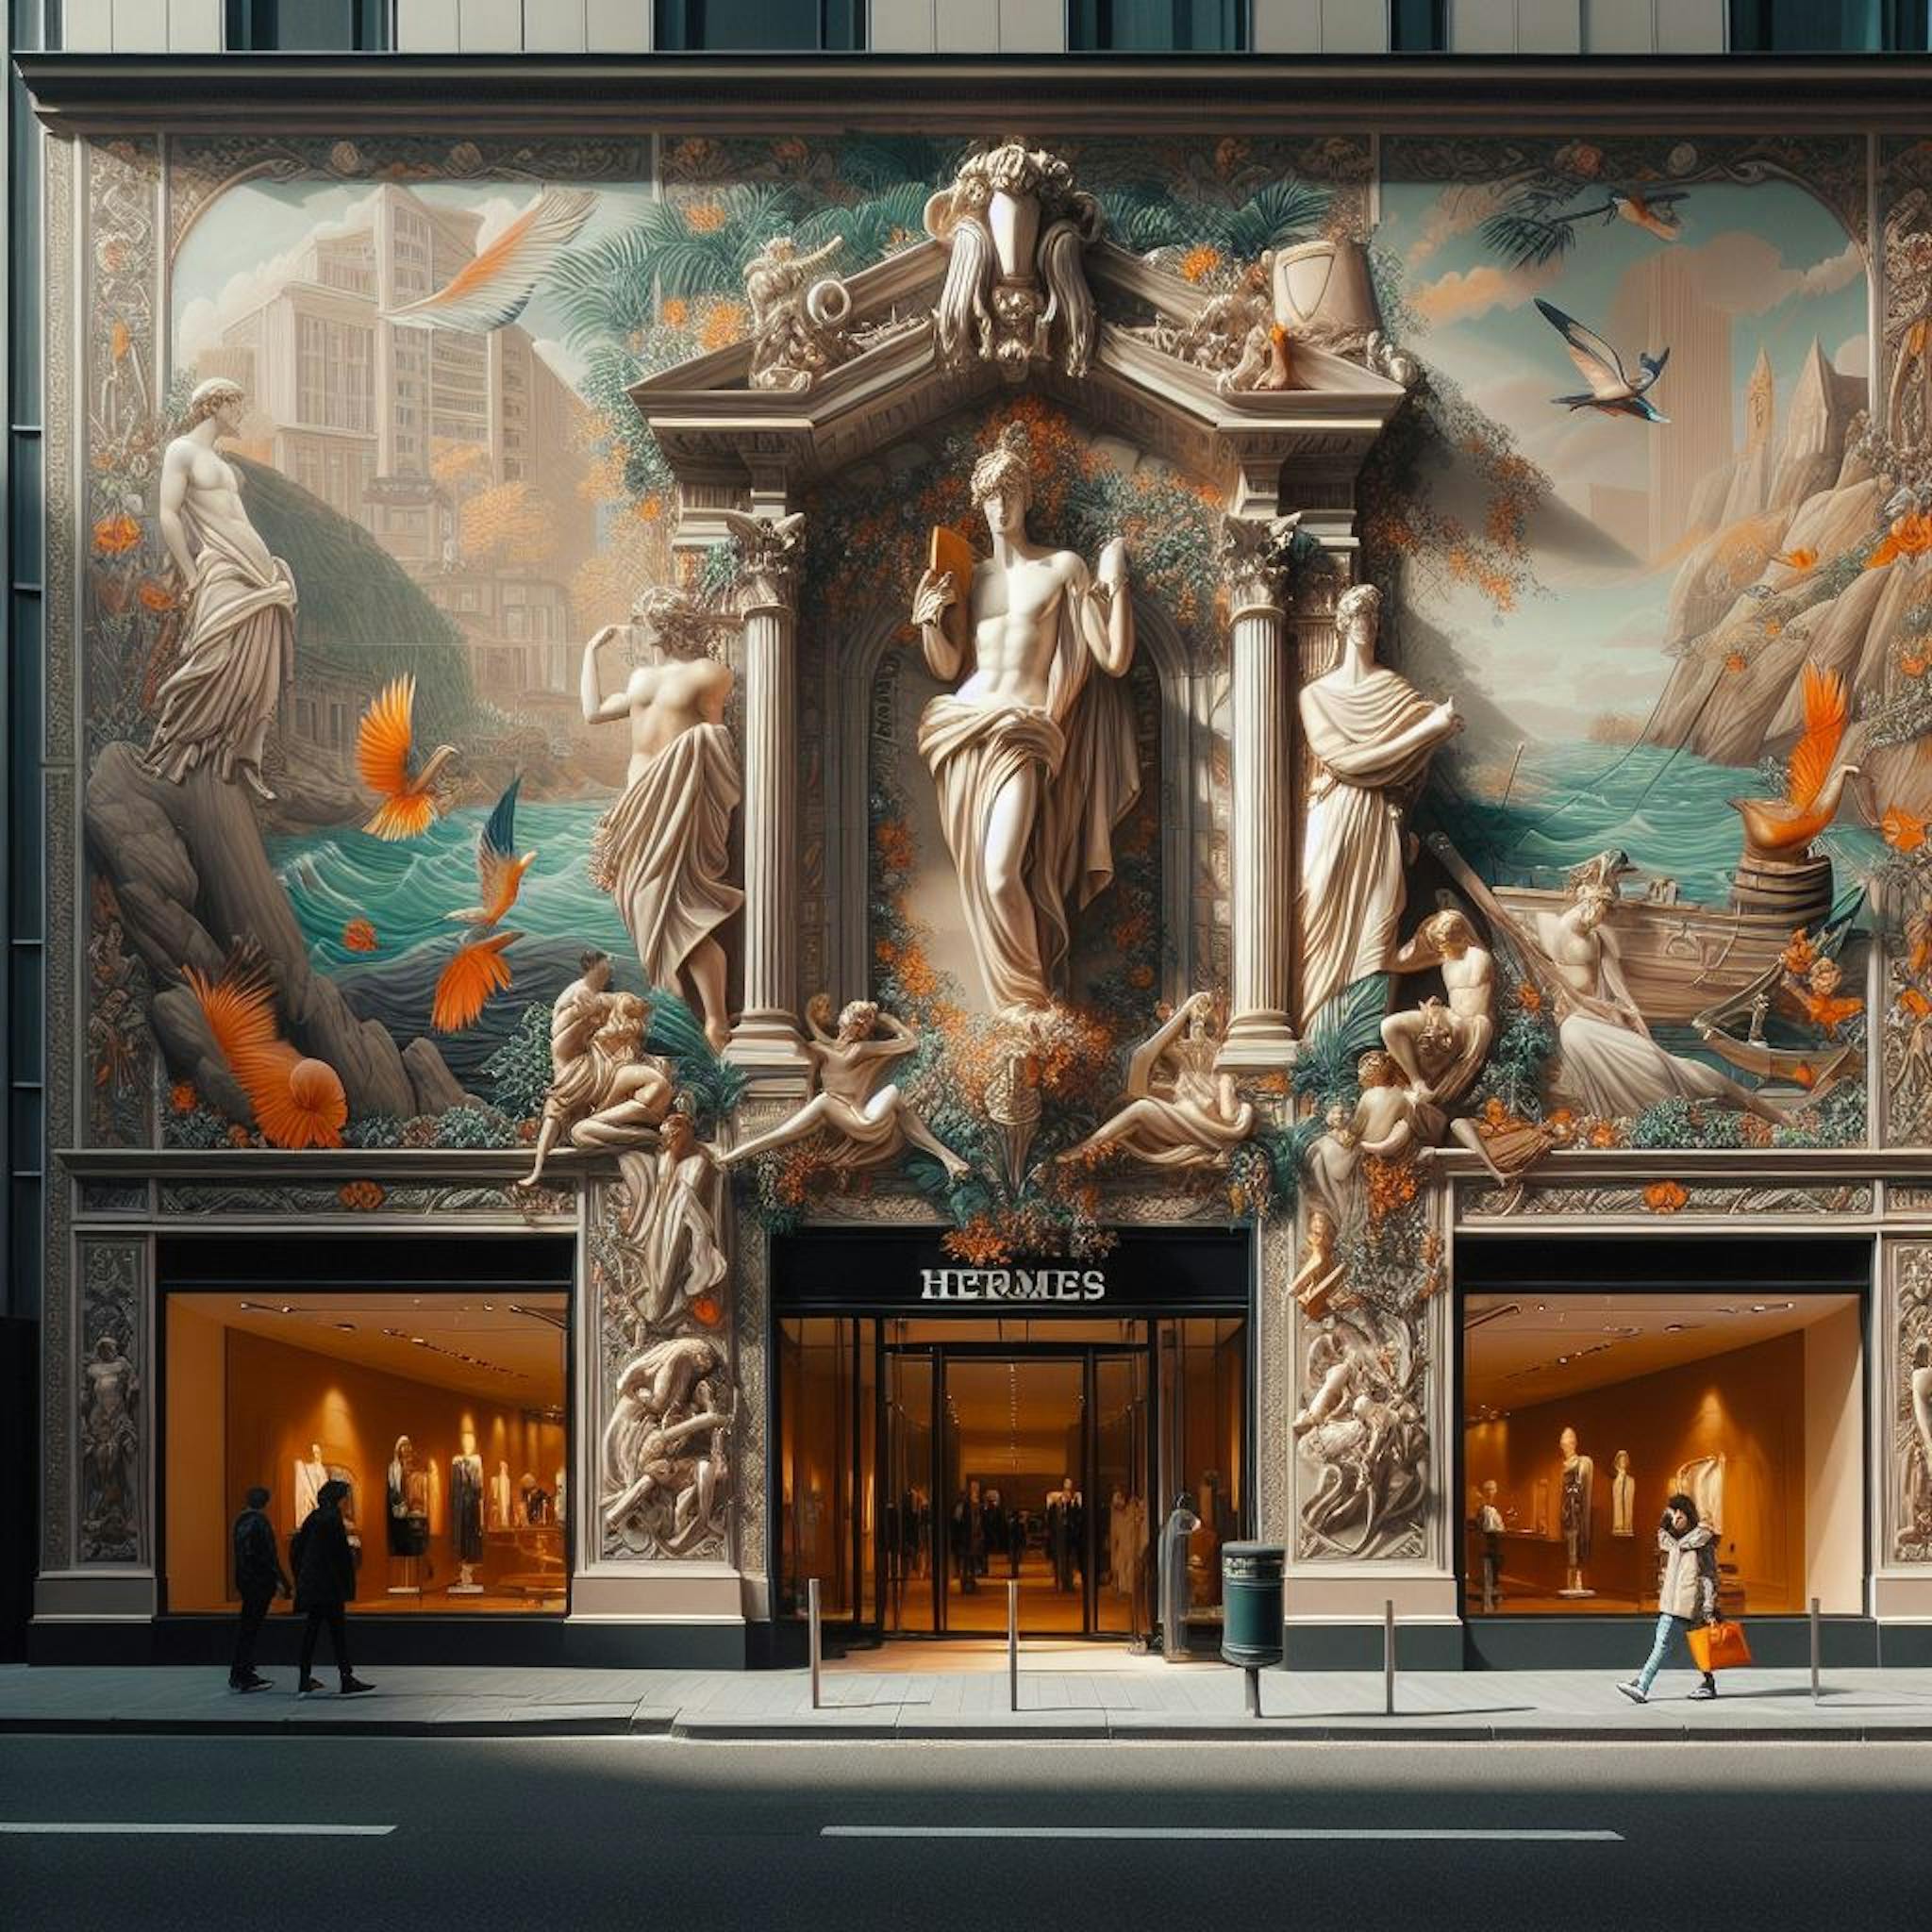 Outside of a Hermes store. 